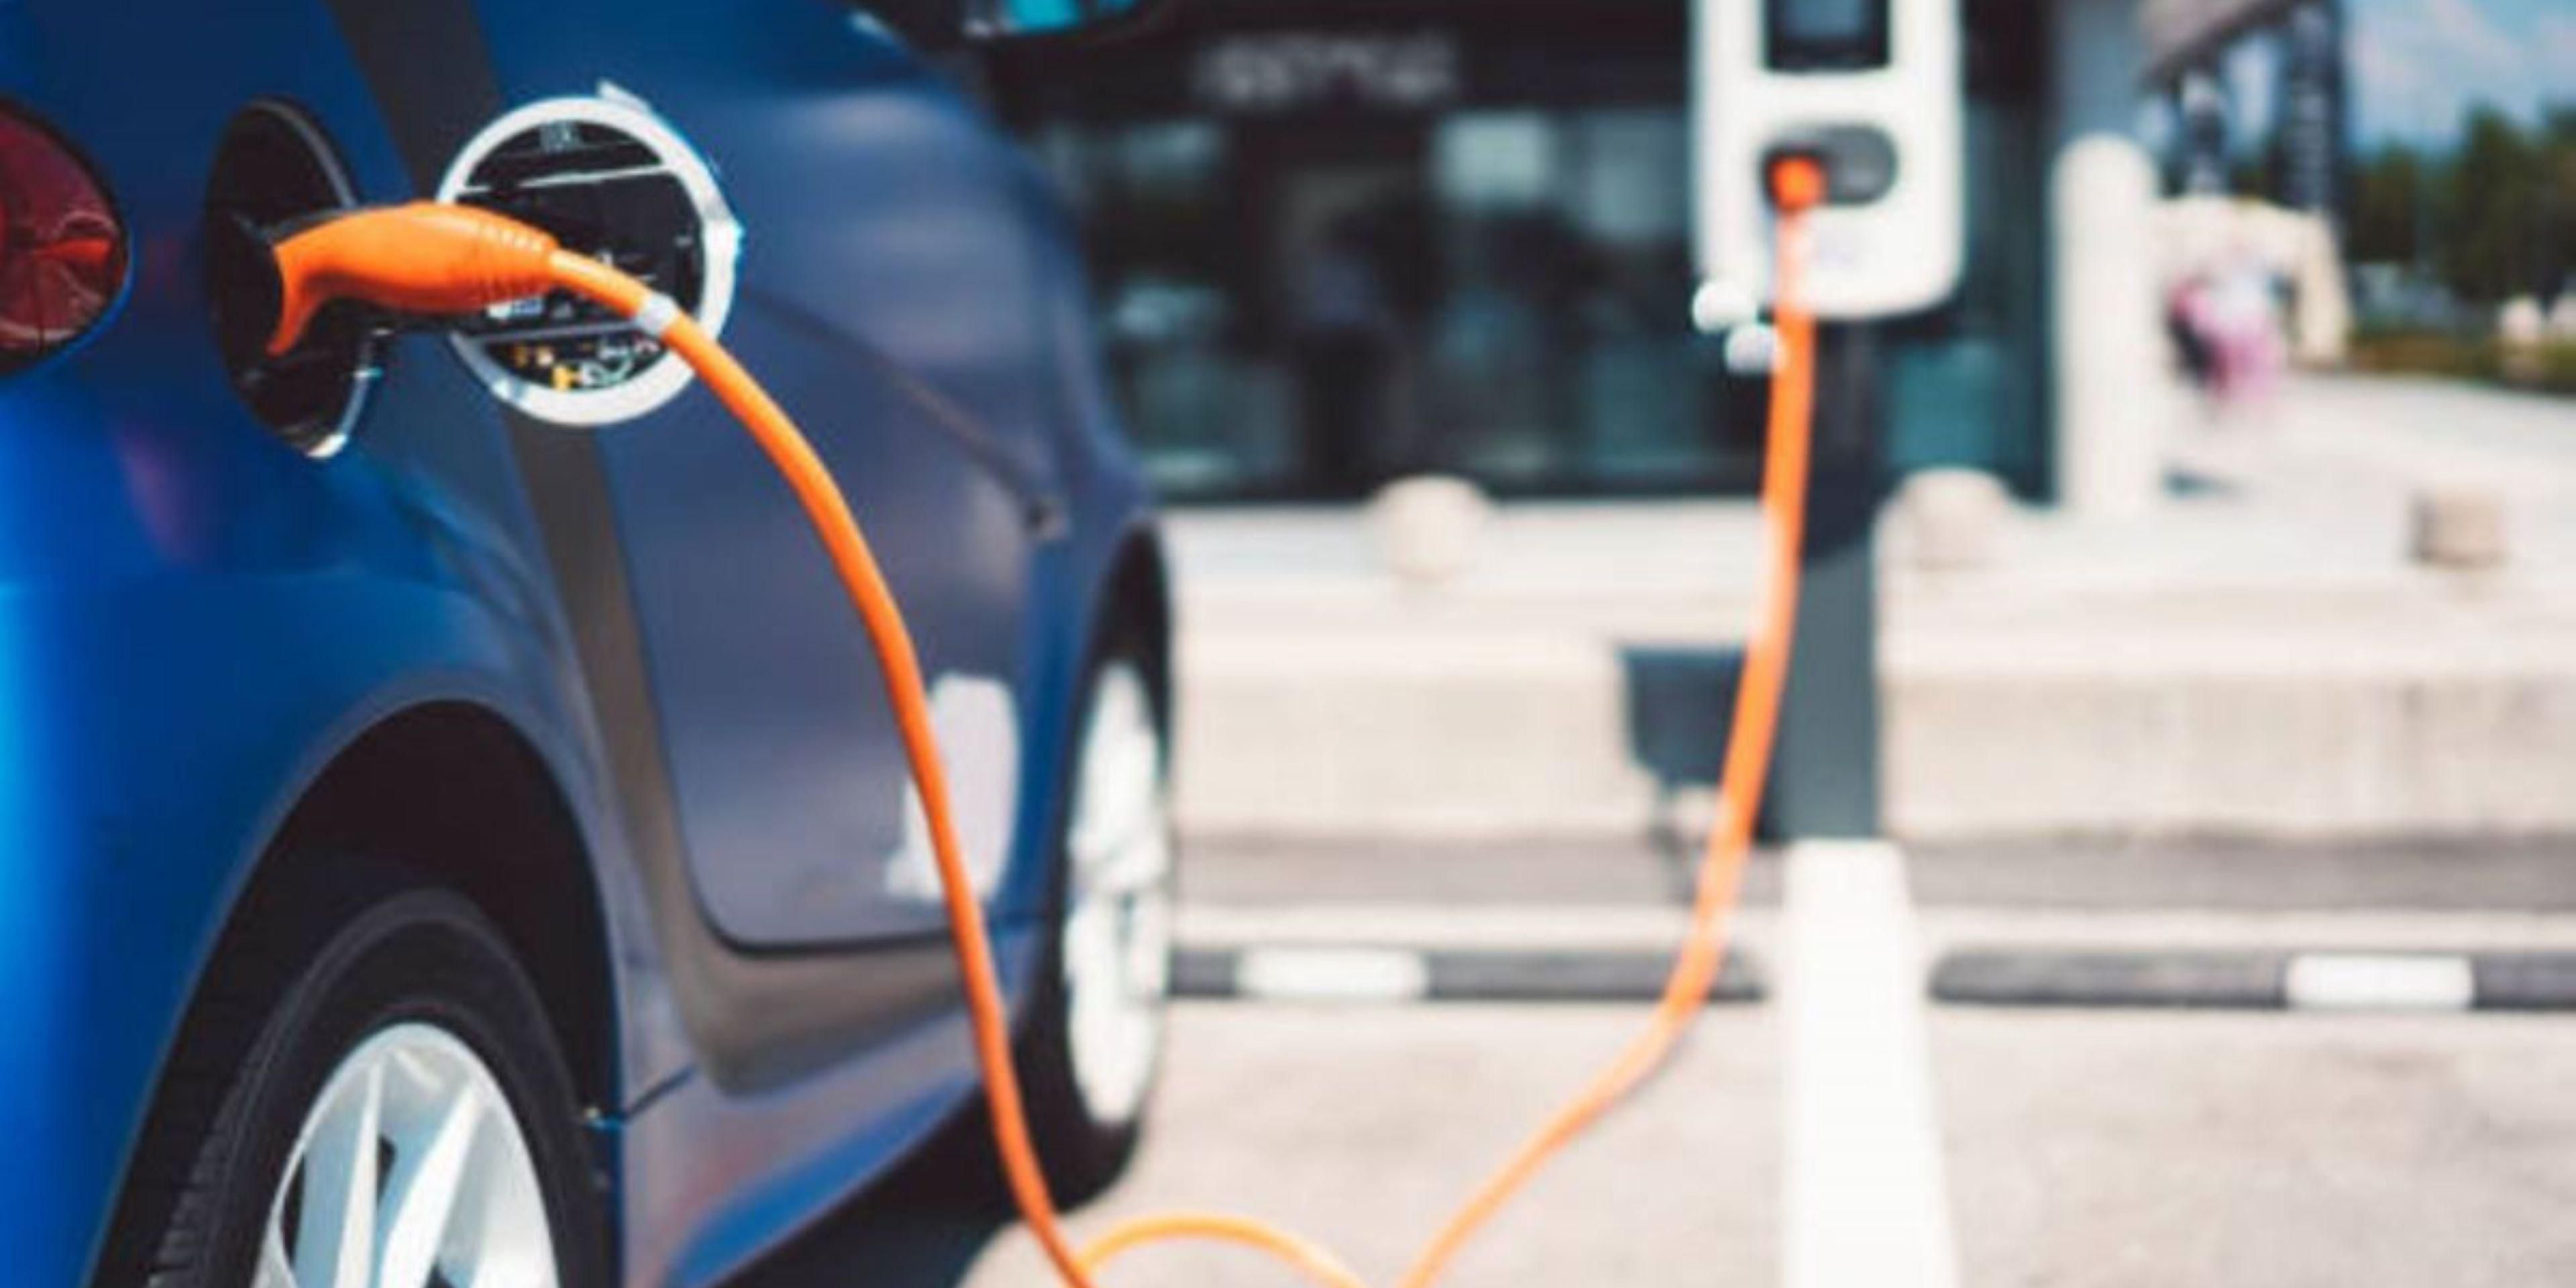 Our hotel has 4 EV charging stations that are free for registered guests. Charge with confidence while you sleep and be ready for a great day of travel ahead!